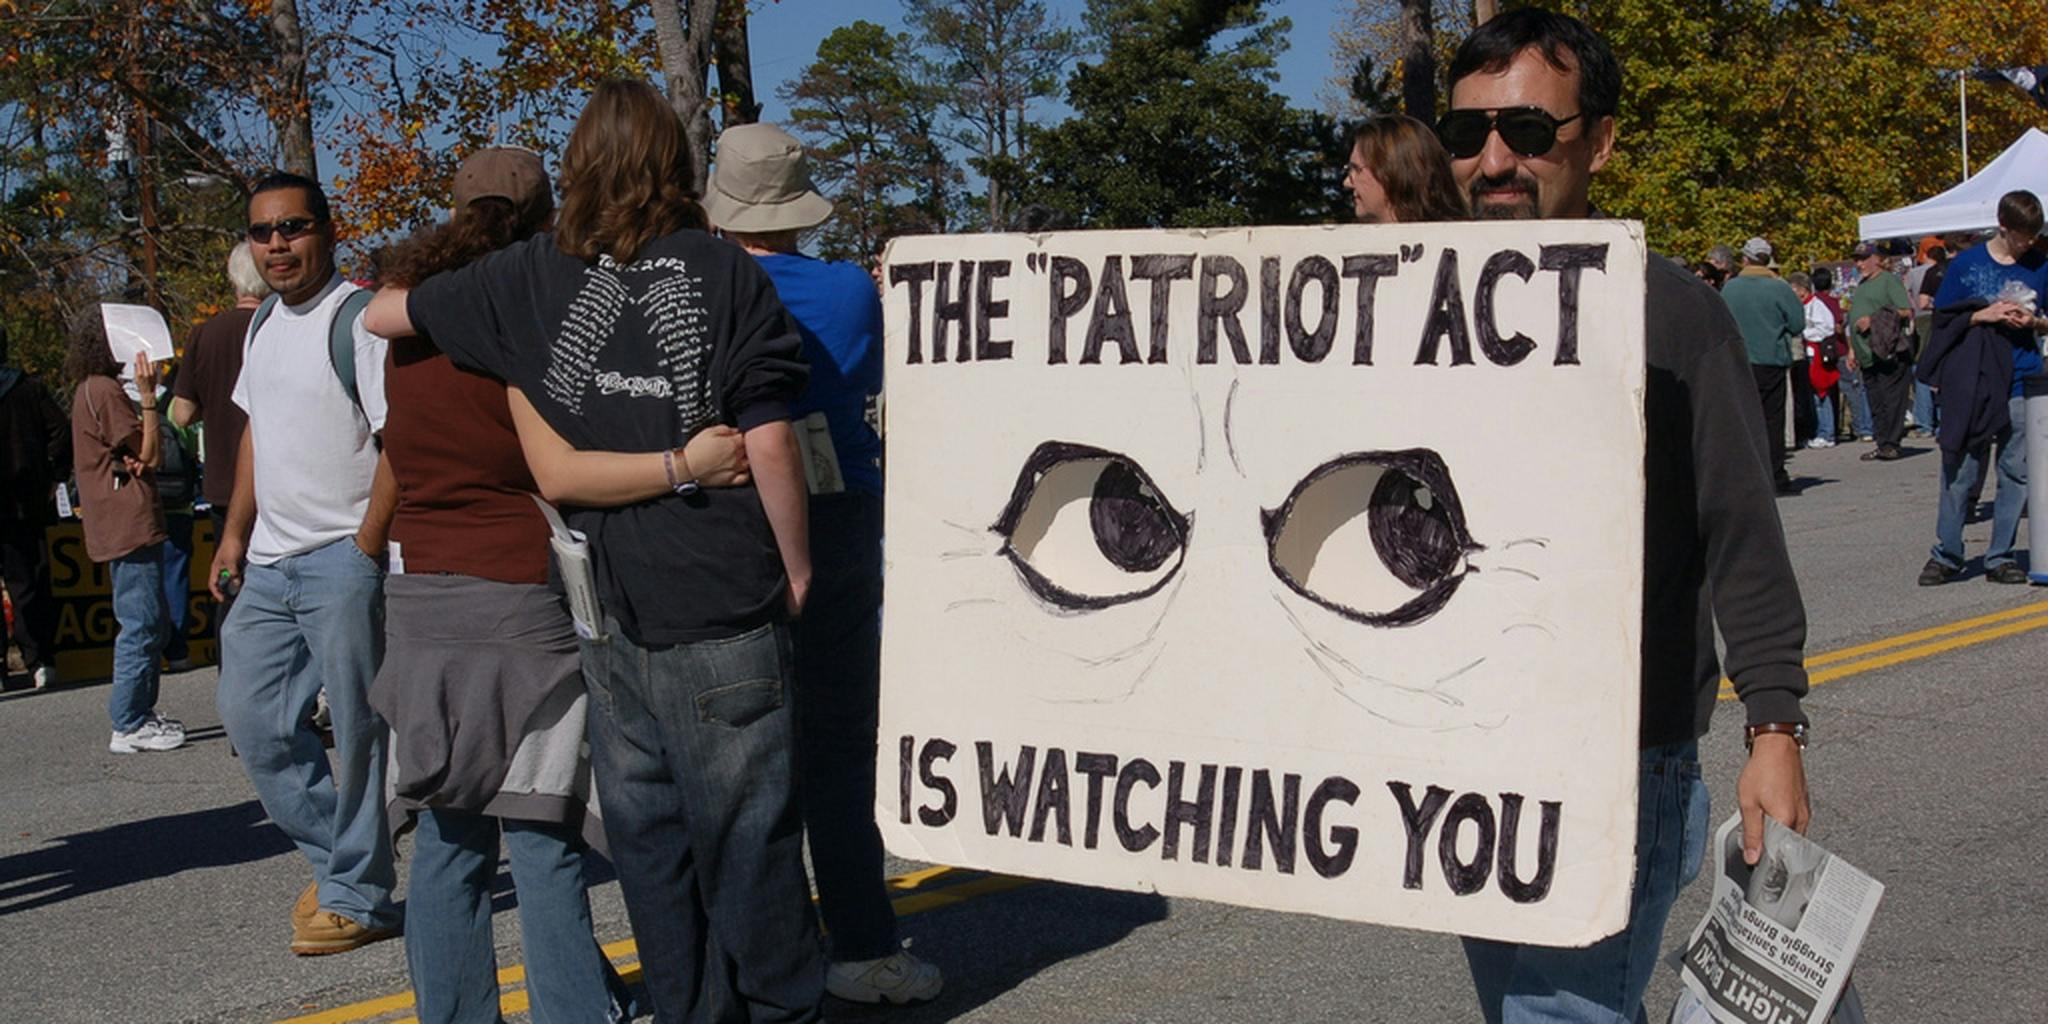 USA Freedom Act vote comes down to the wire as senators wrangle support